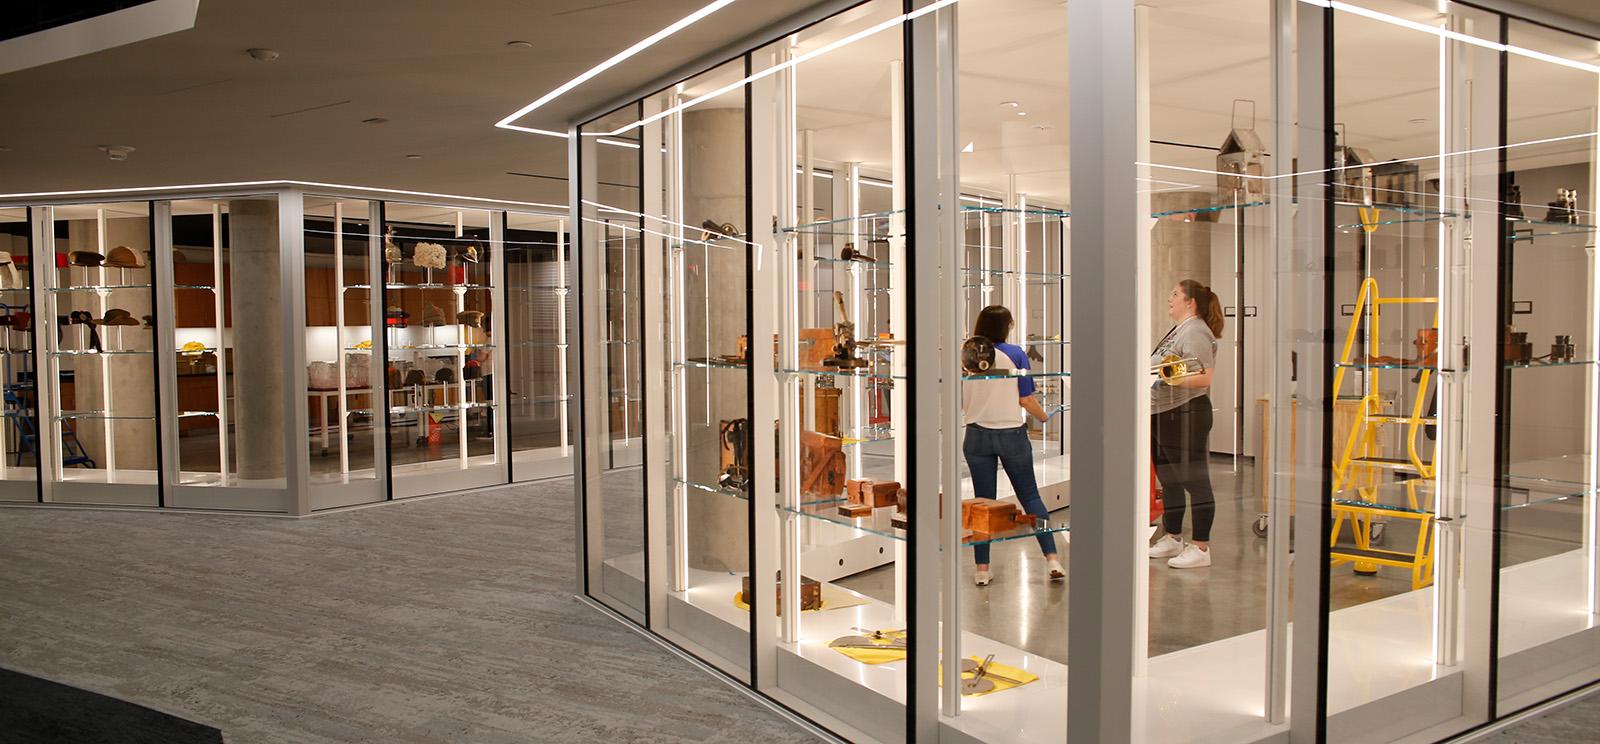 Modern photograph of a museum collections storage area as viewed through glass walls. Artifacts are also displayed along the glass walls. Two people stand in the storage area.